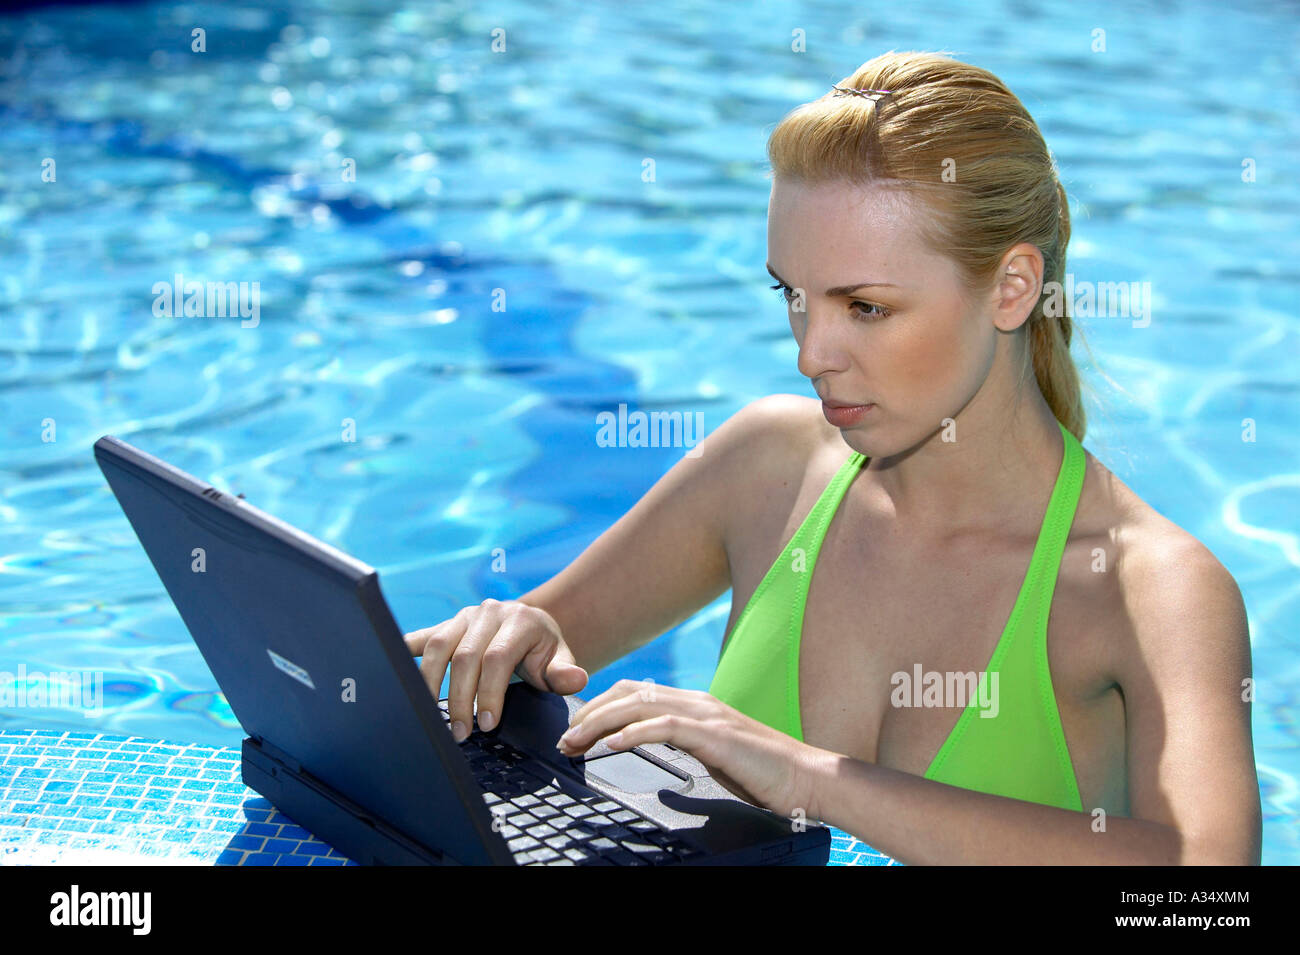 Blonde Frau arbeitet mit einem Laptop am Poolrand, blonde woman working on notebook at the edge of the pool Stock Photo